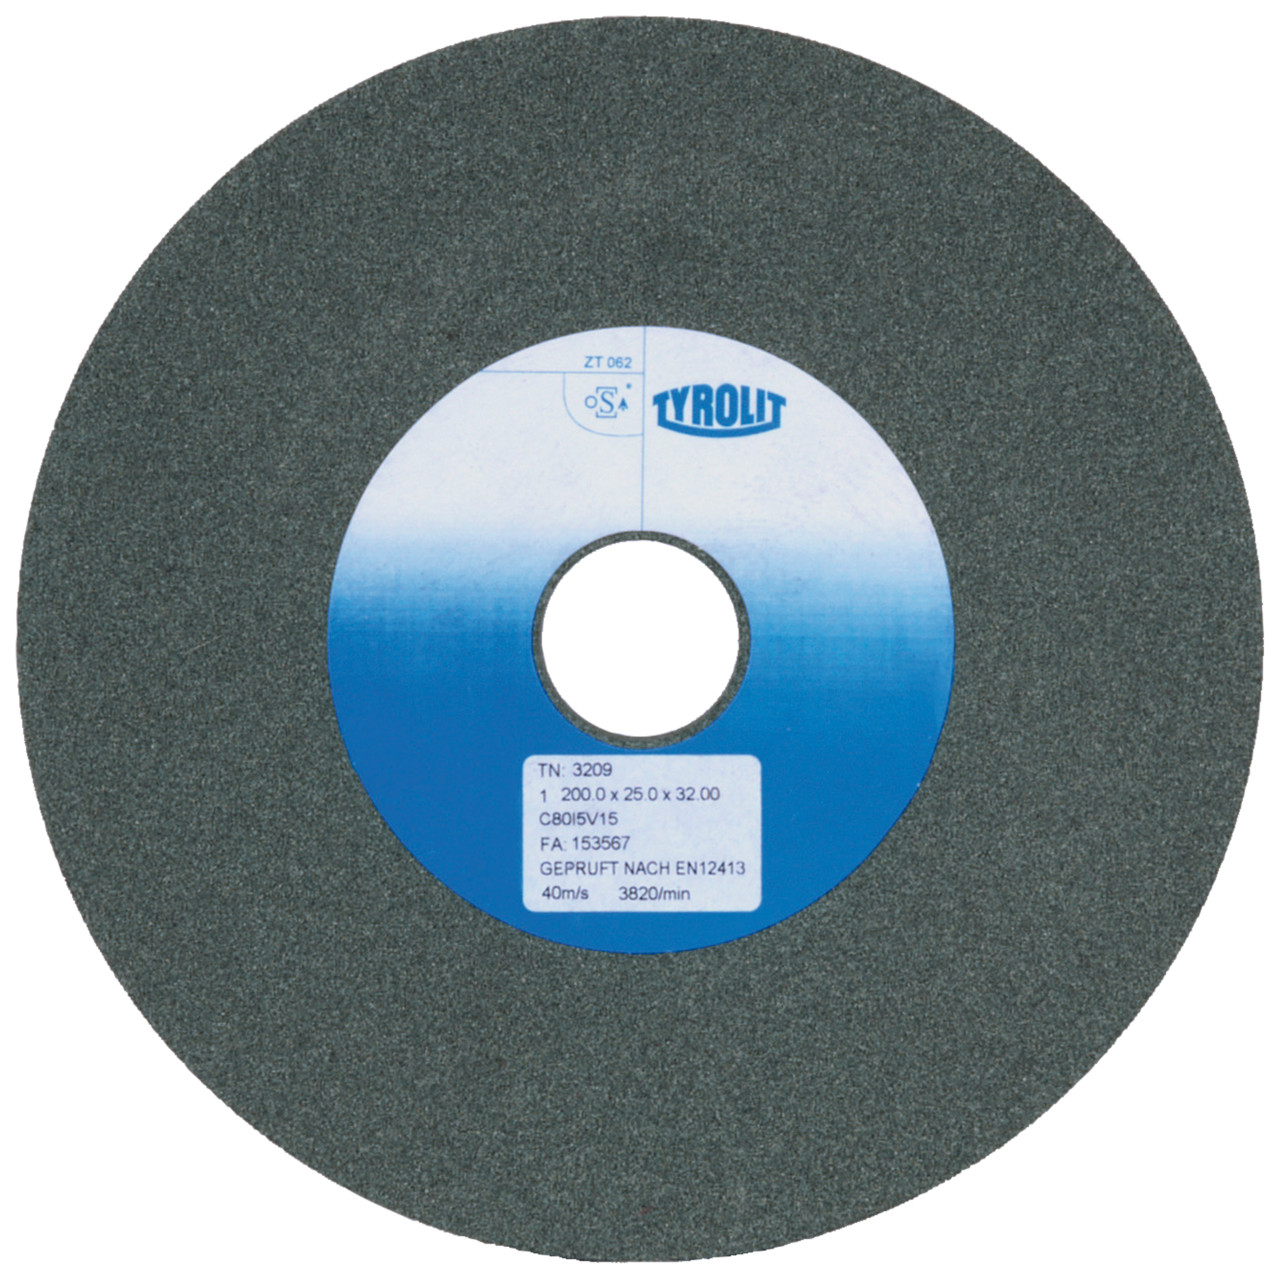 TYROLIT conventional ceramic grinding wheels DxDxH 150x20x32 For carbide and cast iron, shape: 1, Art. 11182